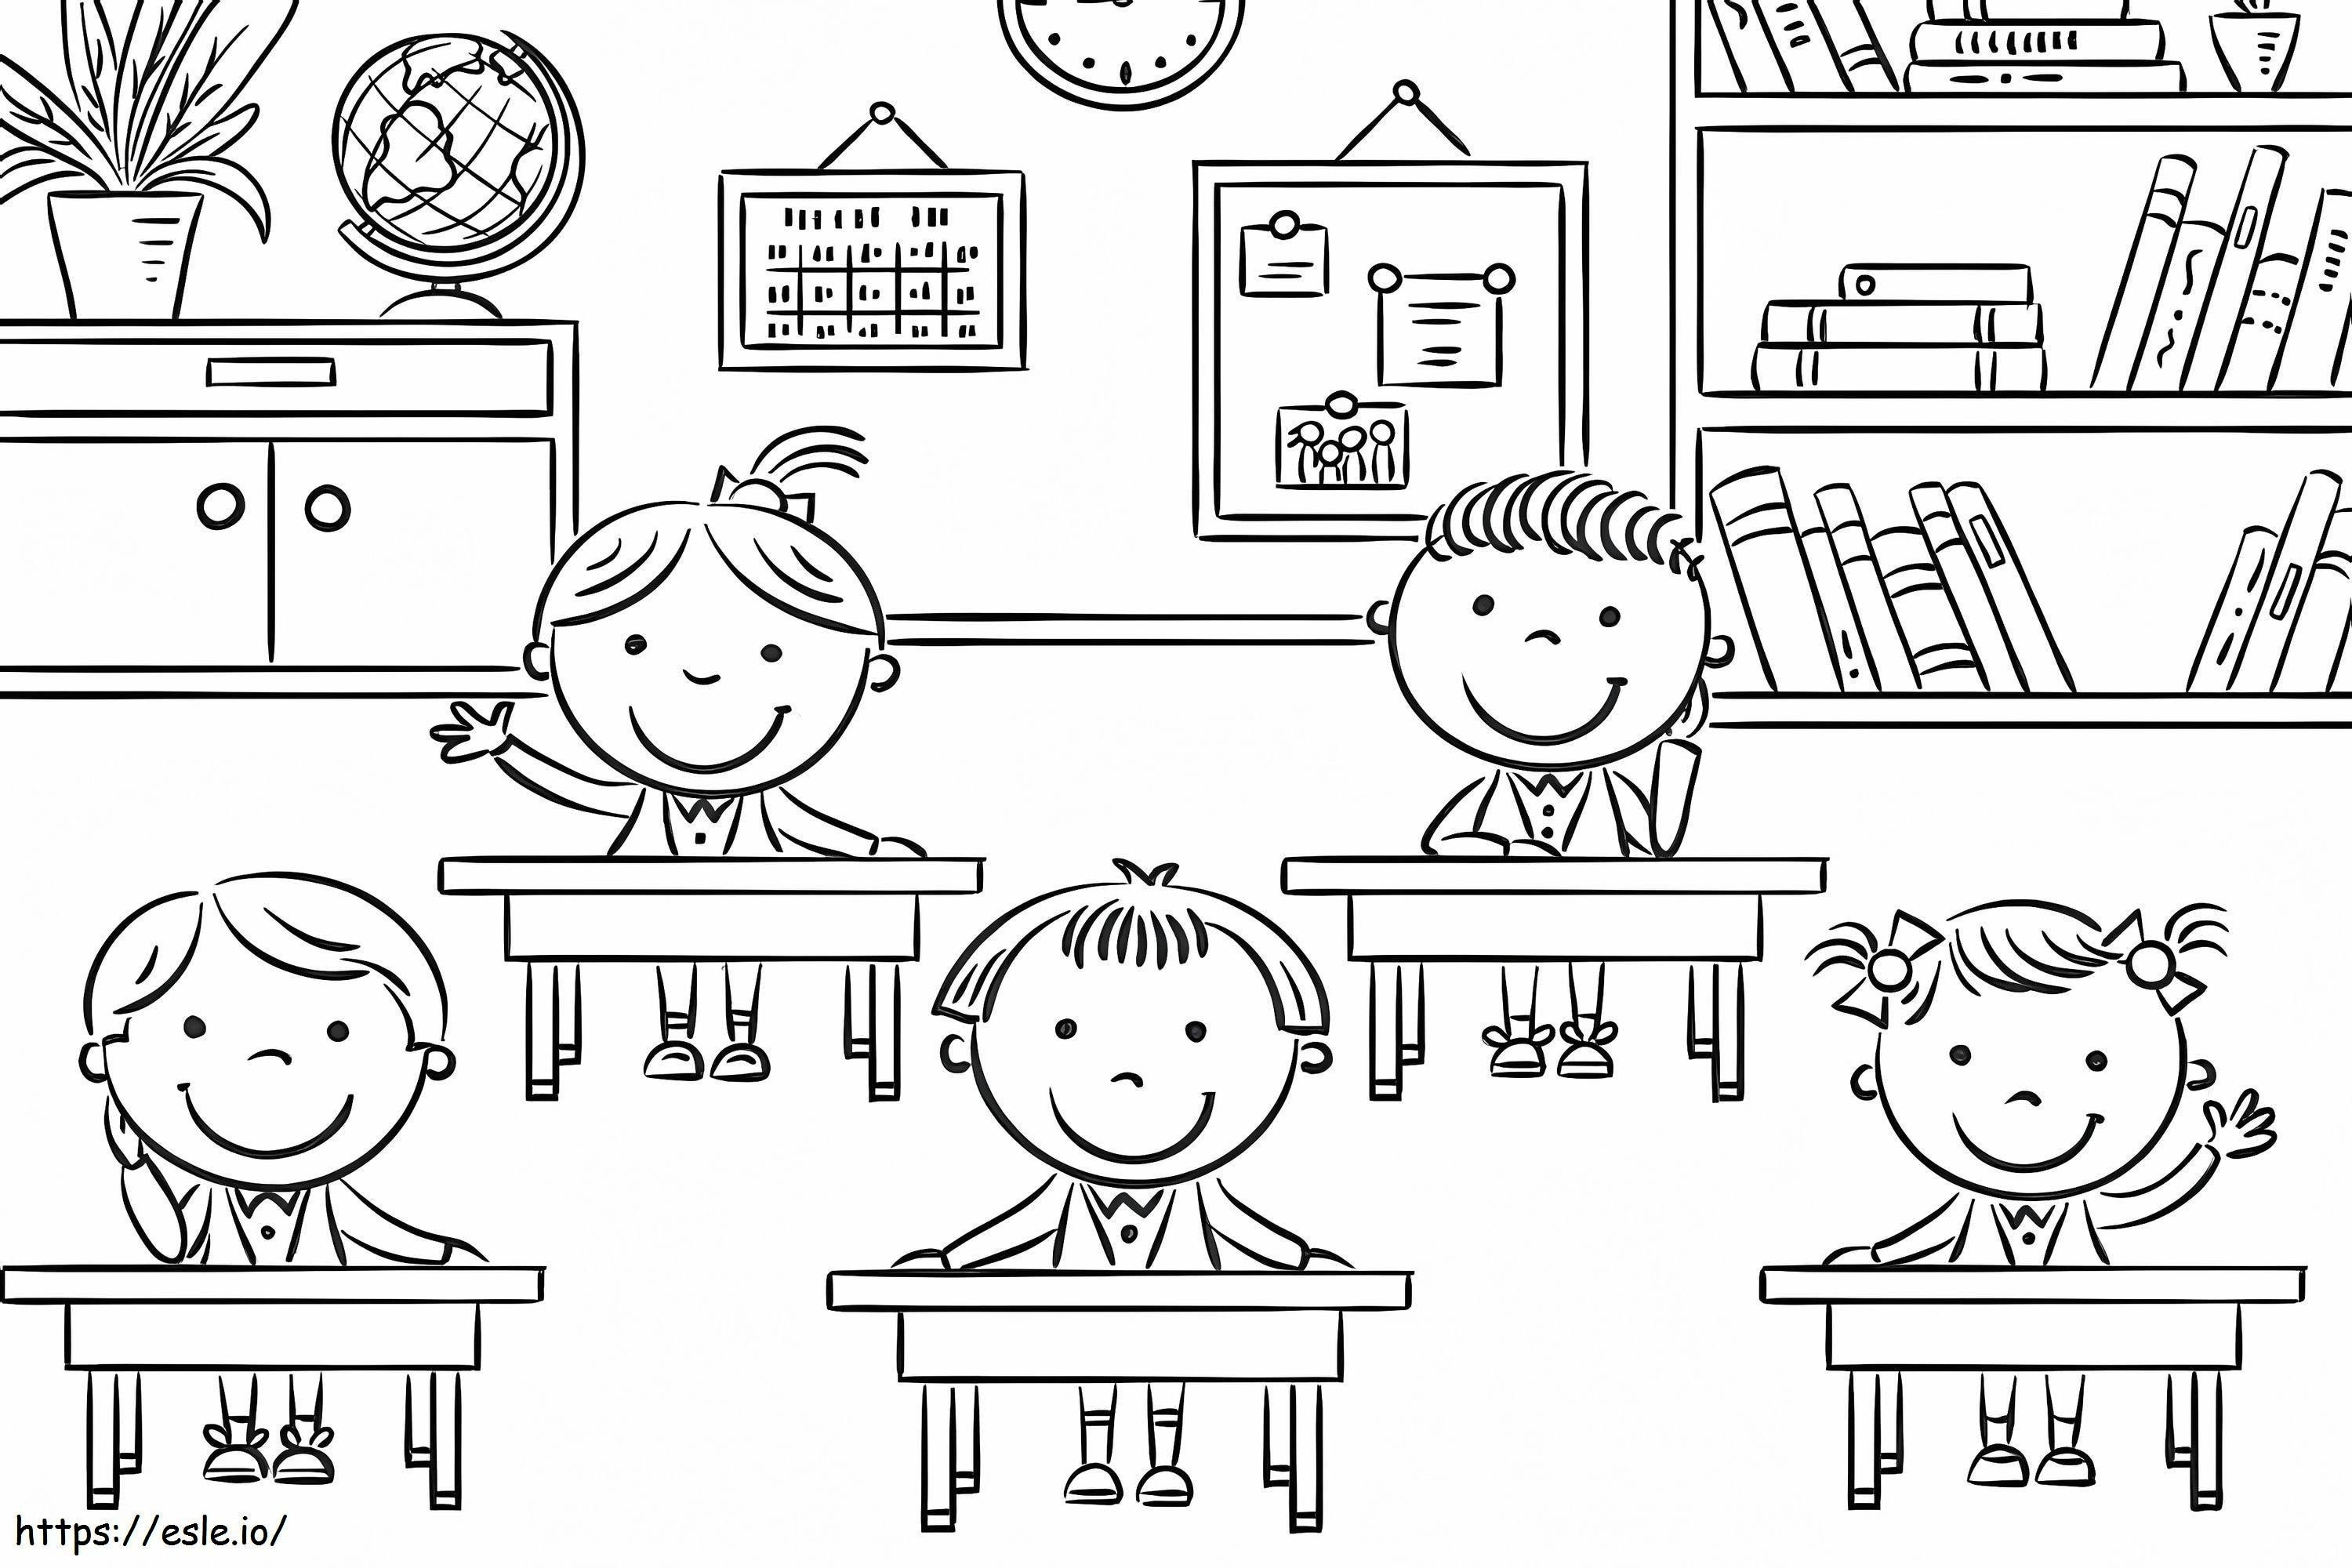 Five Students At School coloring page